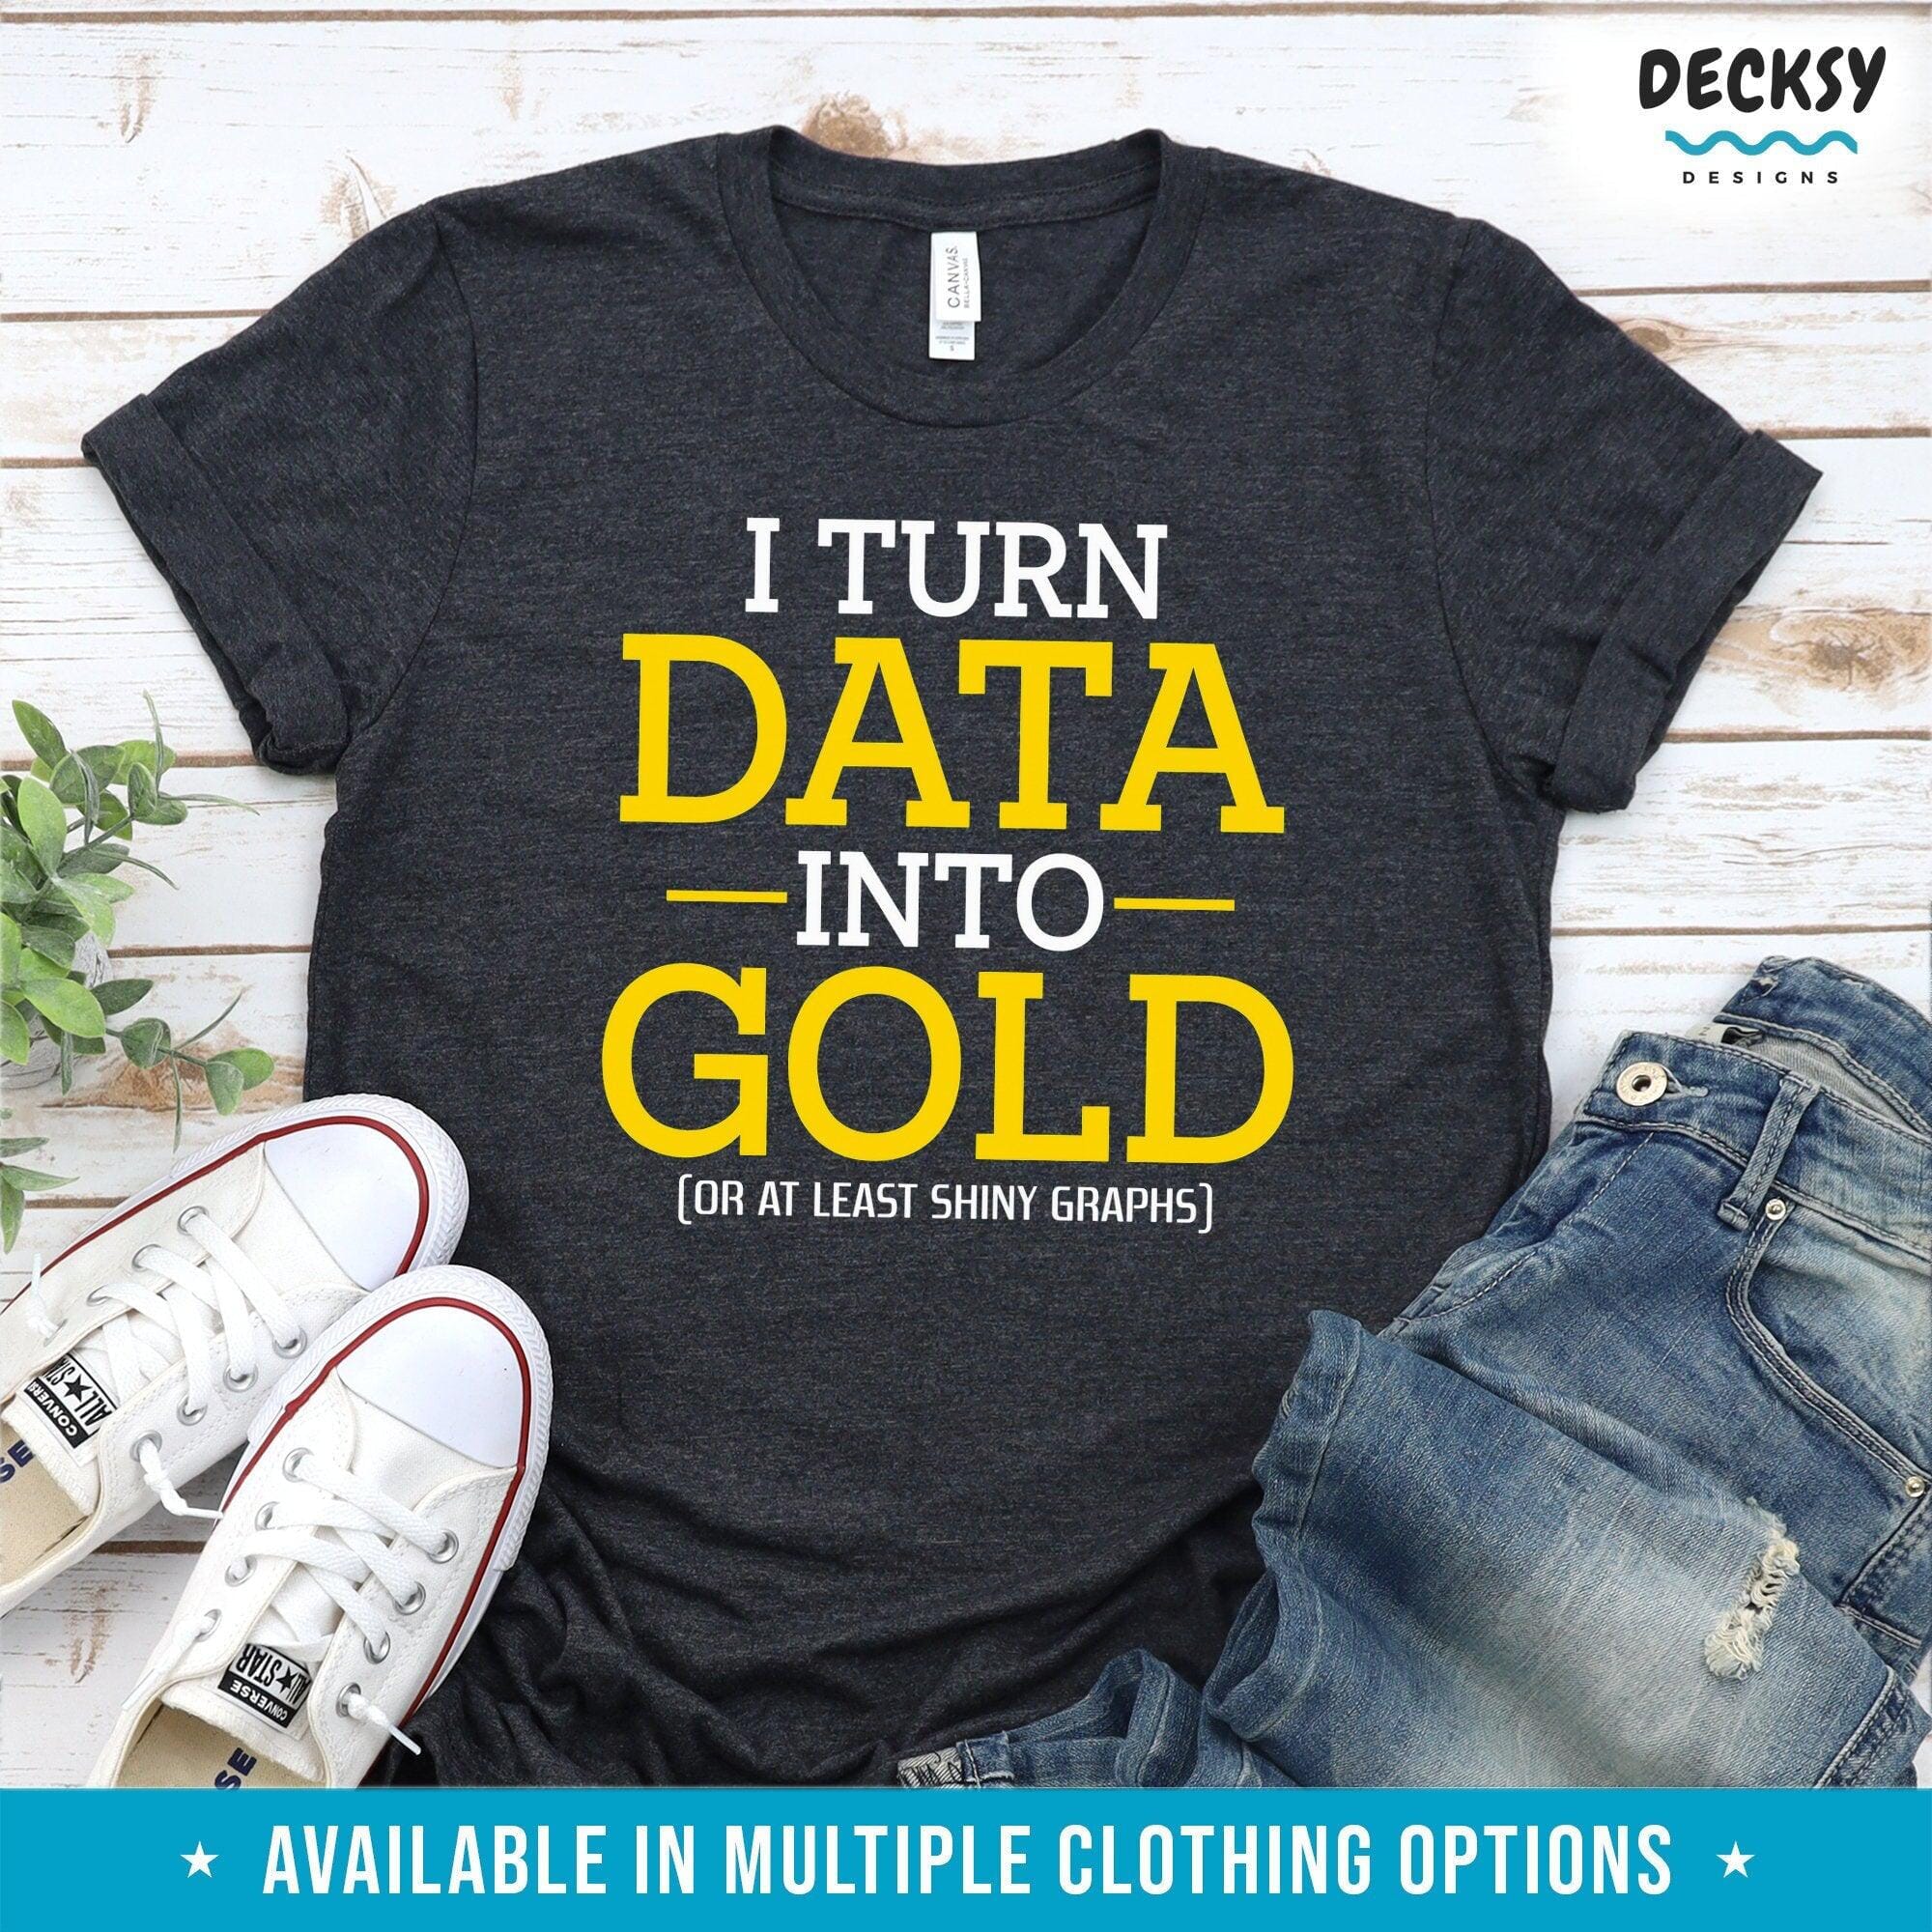 Data Scientist Shirt, Data Analyst Gift-Clothing:Gender-Neutral Adult Clothing:Tops & Tees:T-shirts:Graphic Tees-DecksyDesigns